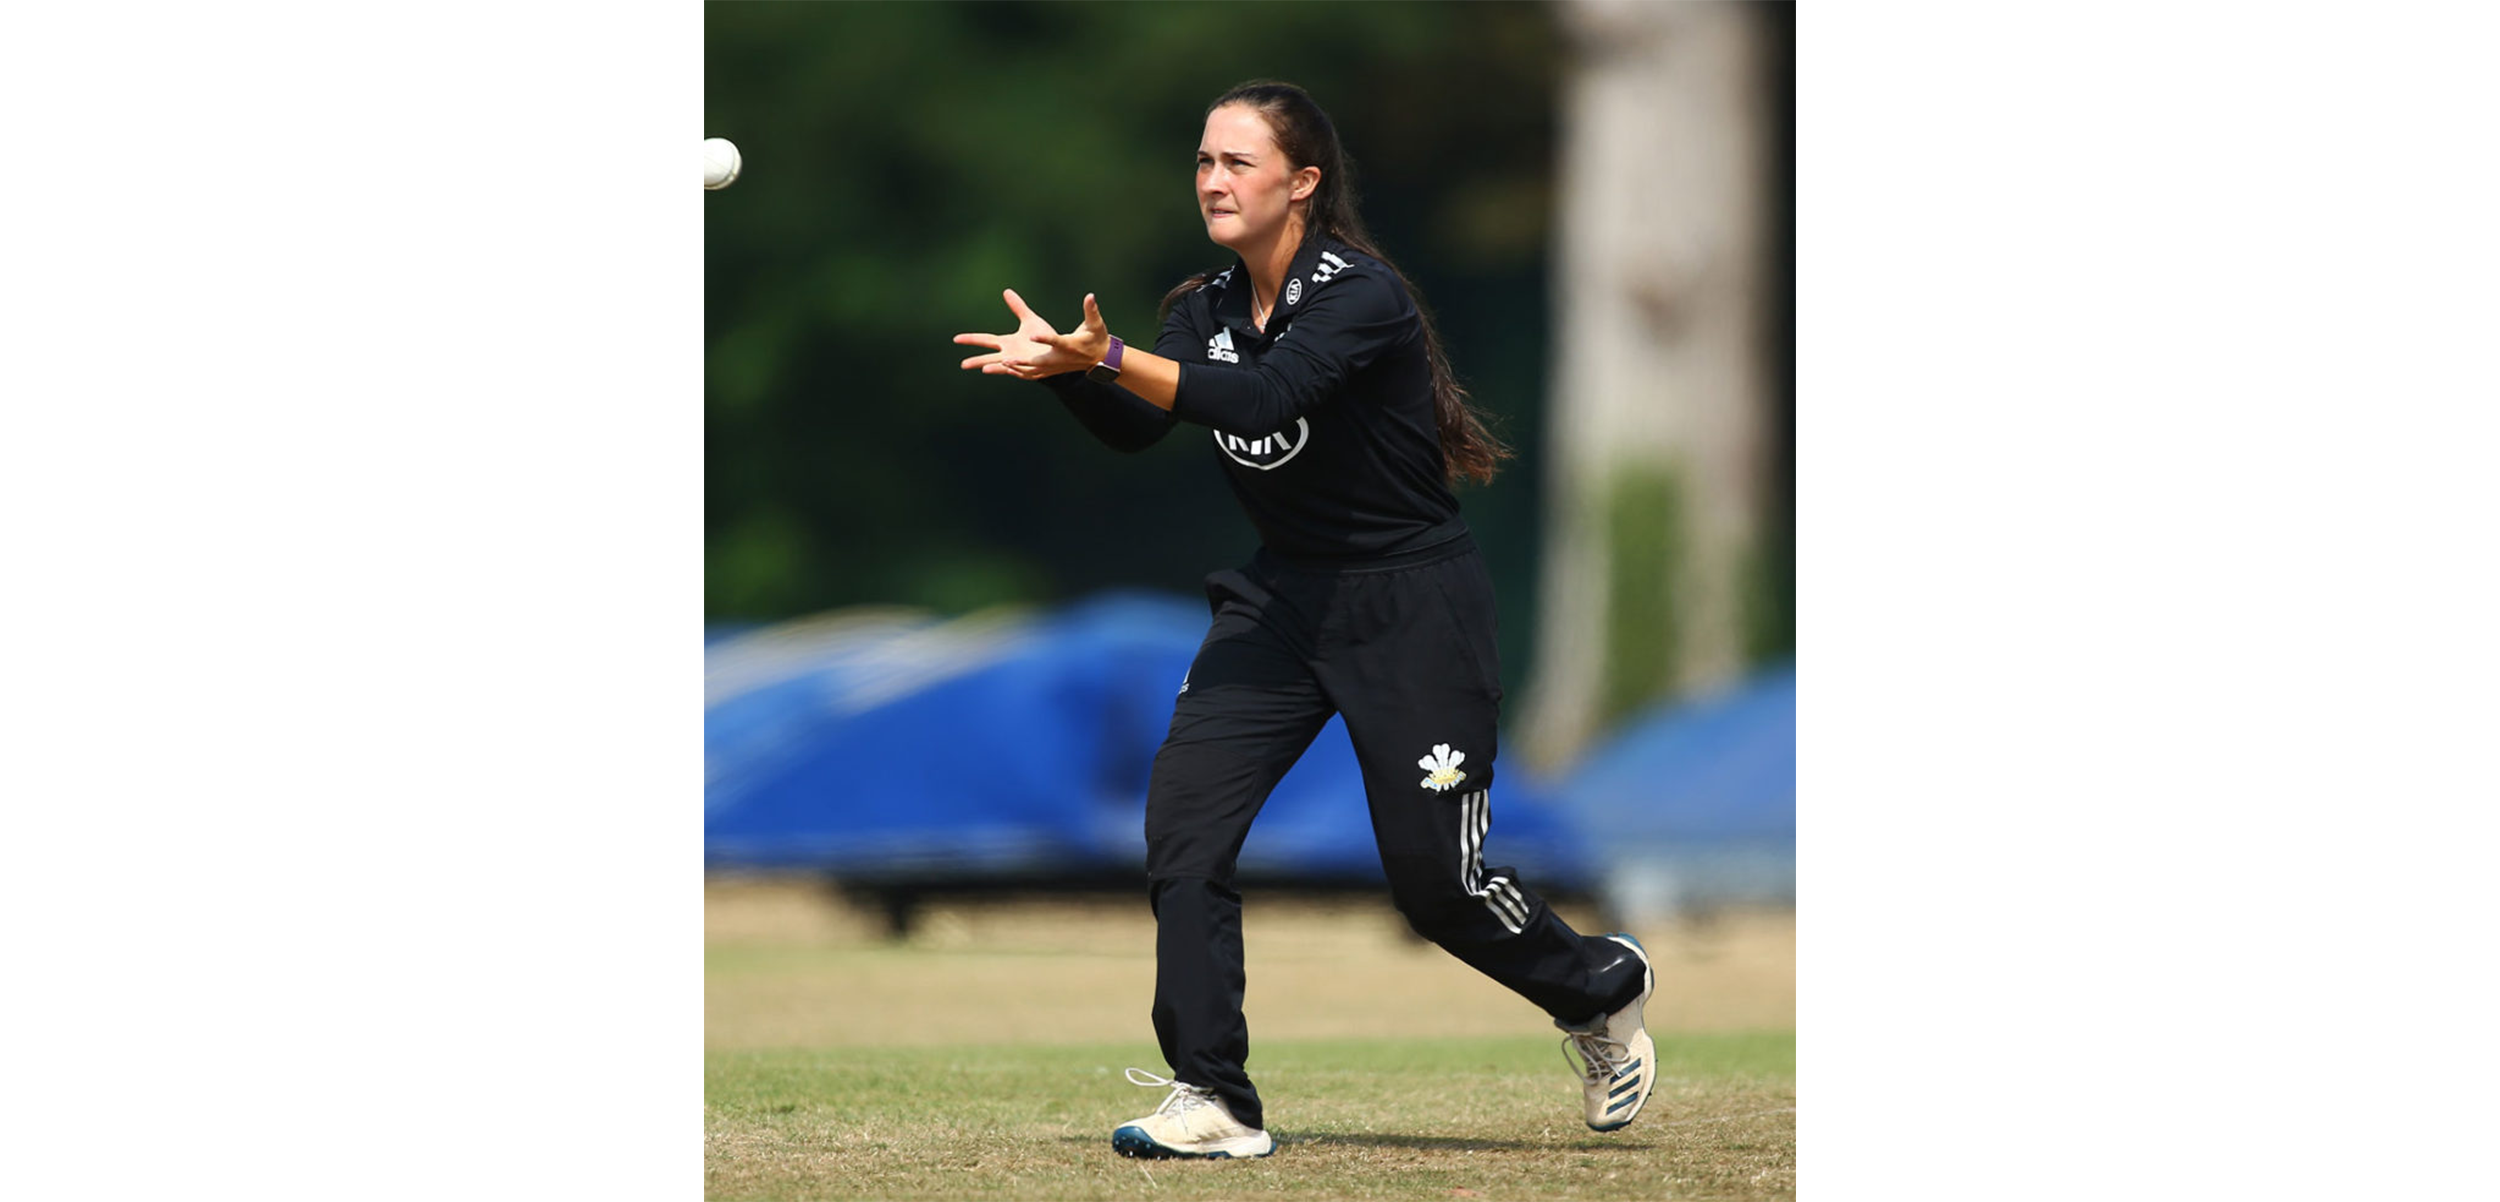 ECB fund sixth professional contract at each women’s regional team